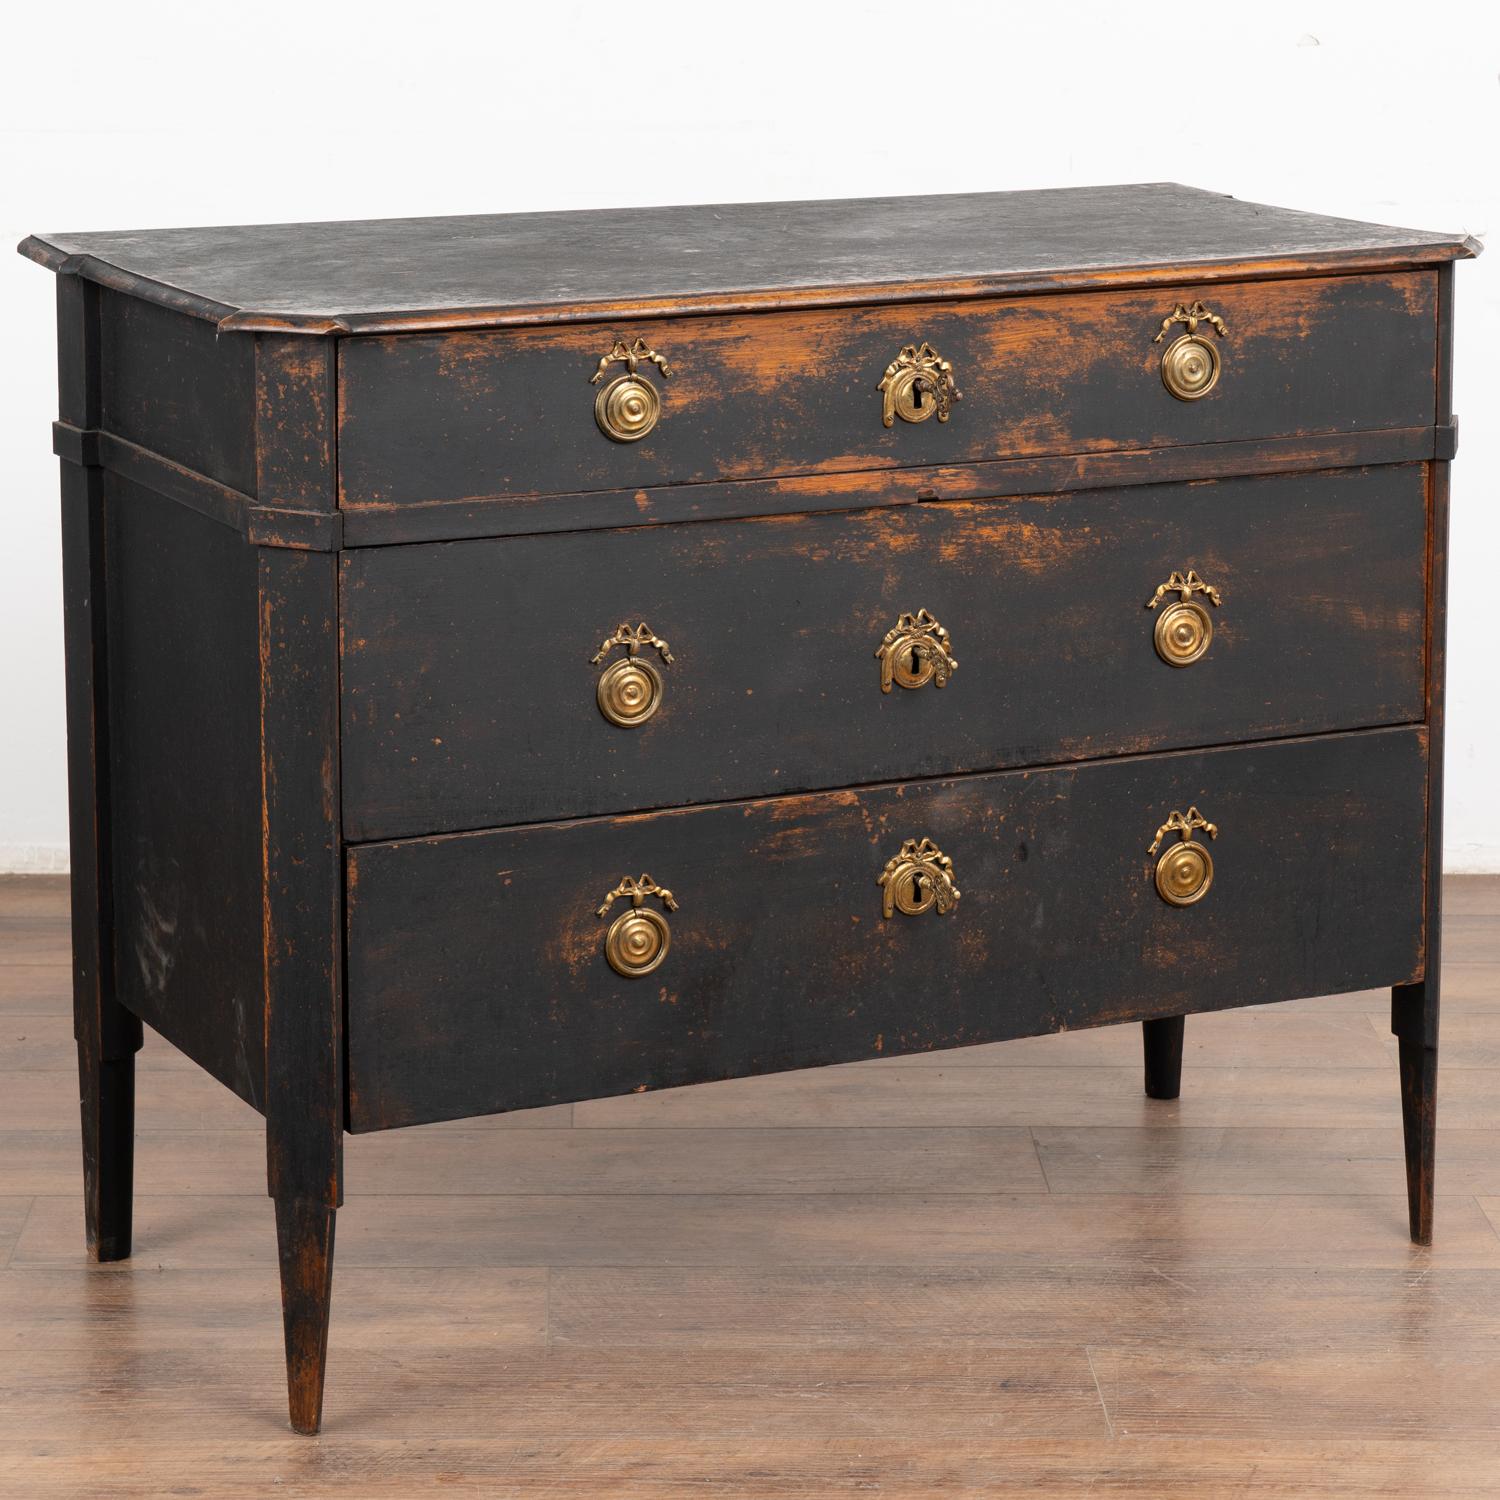 Swedish chest of drawers in black painted pine wood, top with profiled edge.
Three drawers with canted sides and tapered feet.
Restored, drawers function with two brass pulls on each. Three keys included, locks no longer function.
While the black